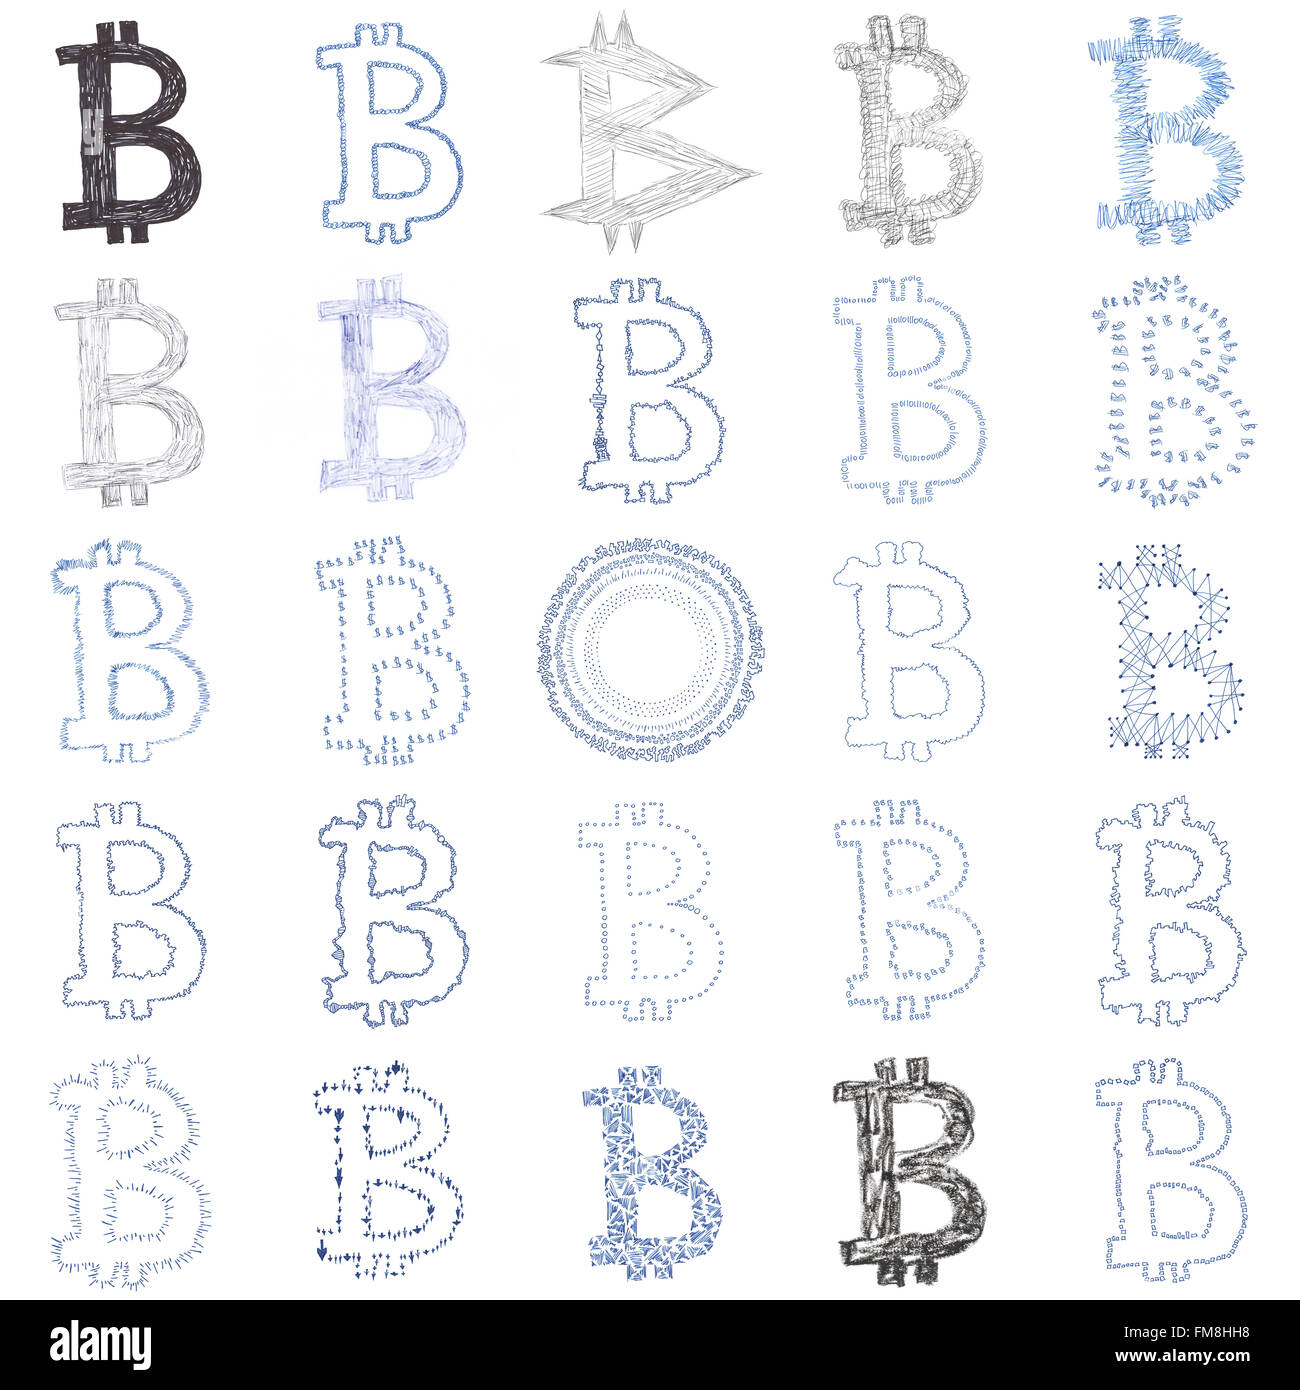 Hand-drawn Bitcoin logo. Collage of a digital decentralized crypto currency symbols. Stock Photo